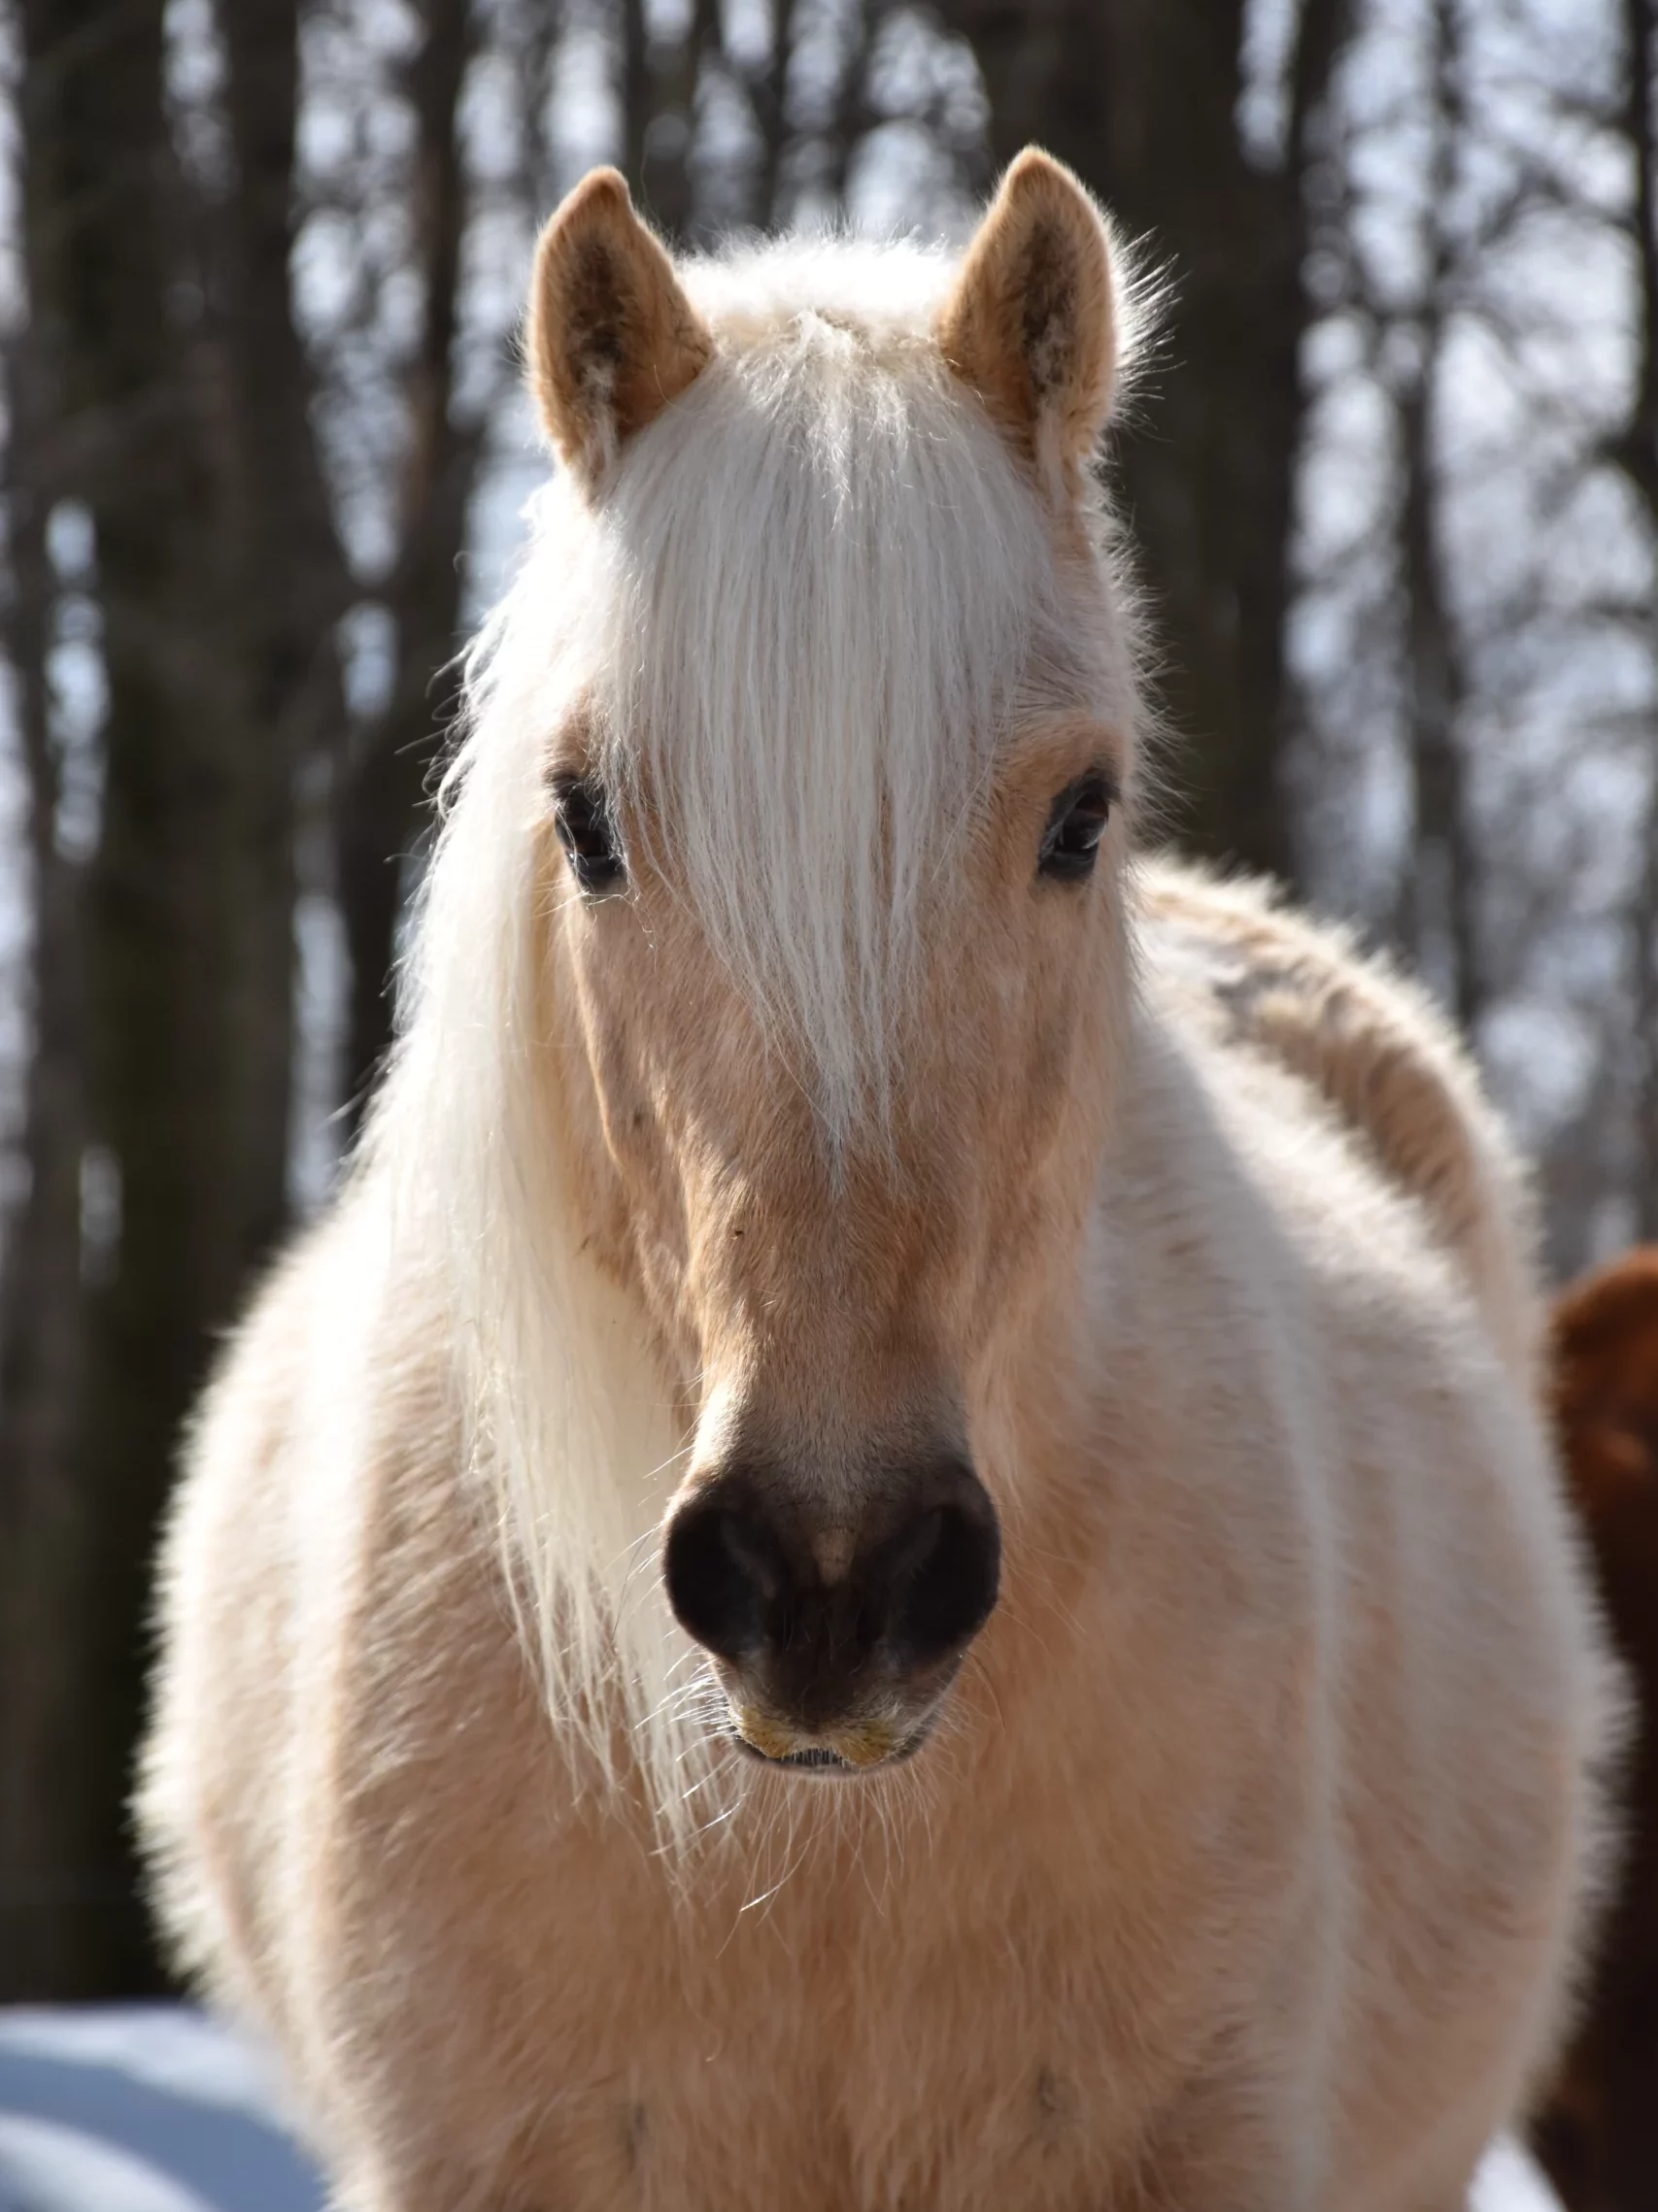 beautiful light colored horse looking directly at the camera